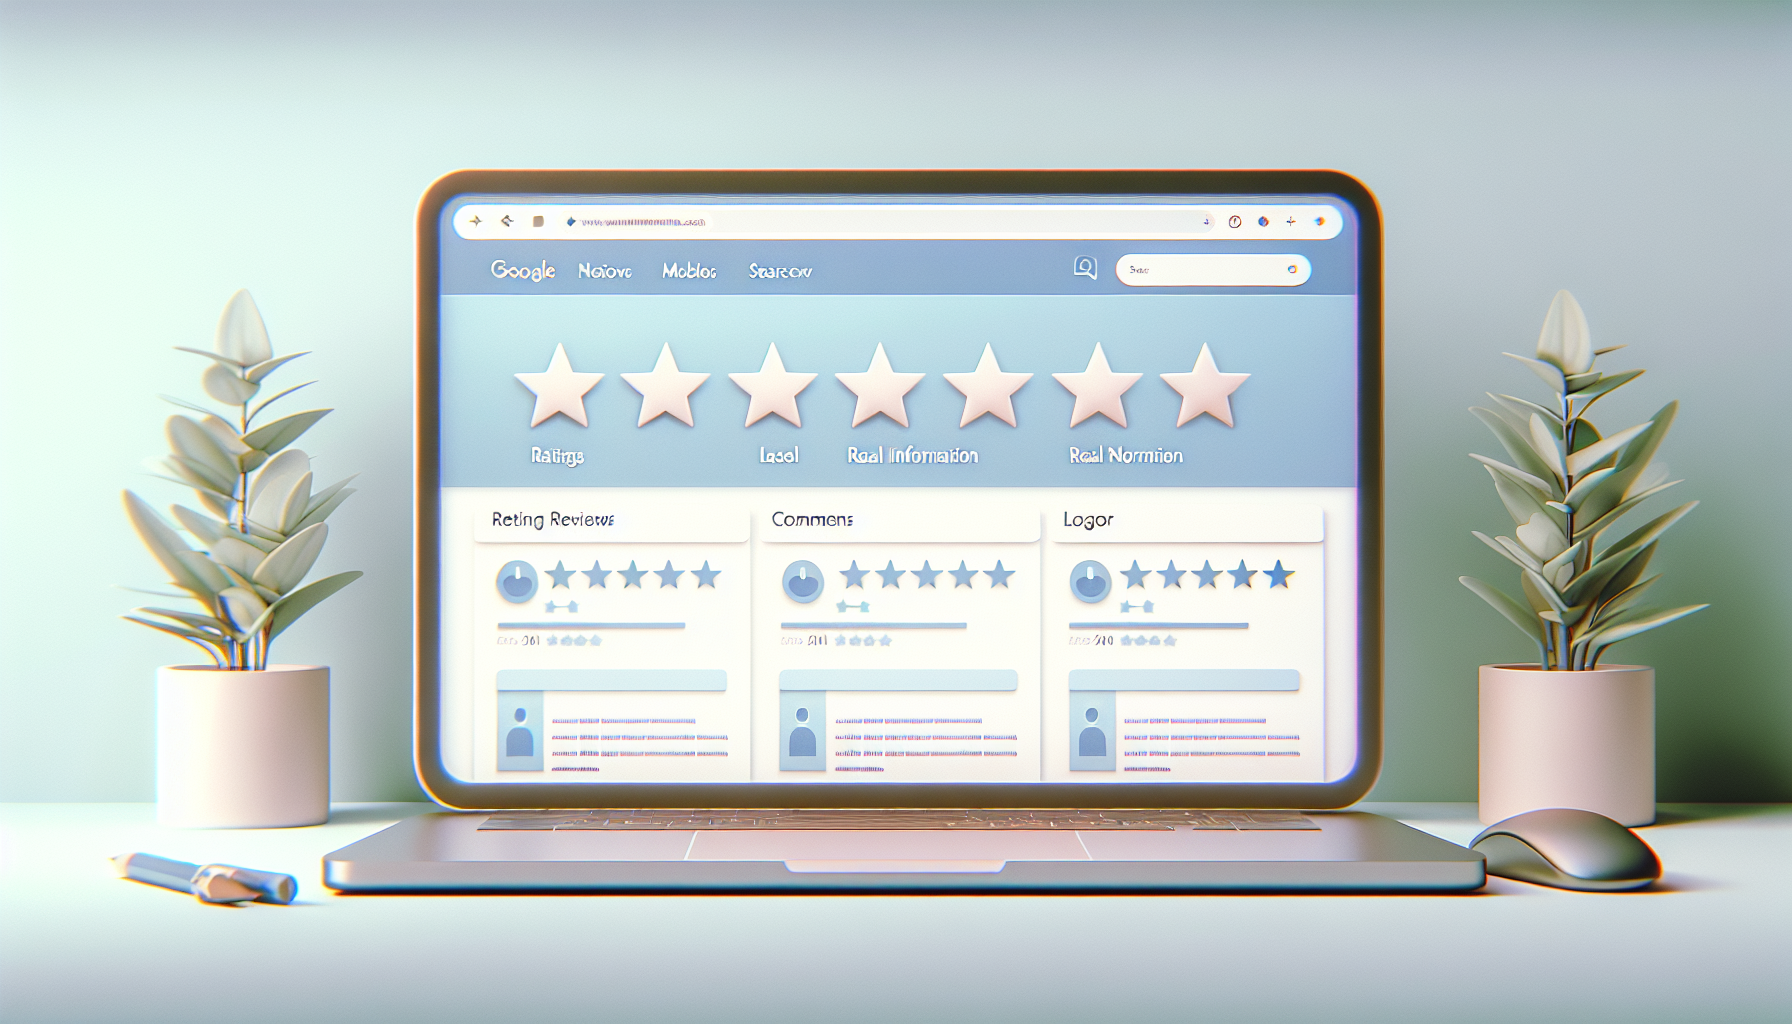 Create a photo-realistic image of a digital device screen, possibly a laptop or a computer, displaying several Google Reviews on a website. A user-friendly website interface can be seen, showing ratings, comments, and a search bar. The color scheme is subtle and soothing with soft shades dominating the visual space. There shouldn't be any personal information or real logos, instead, use neutral icons and place filler text.